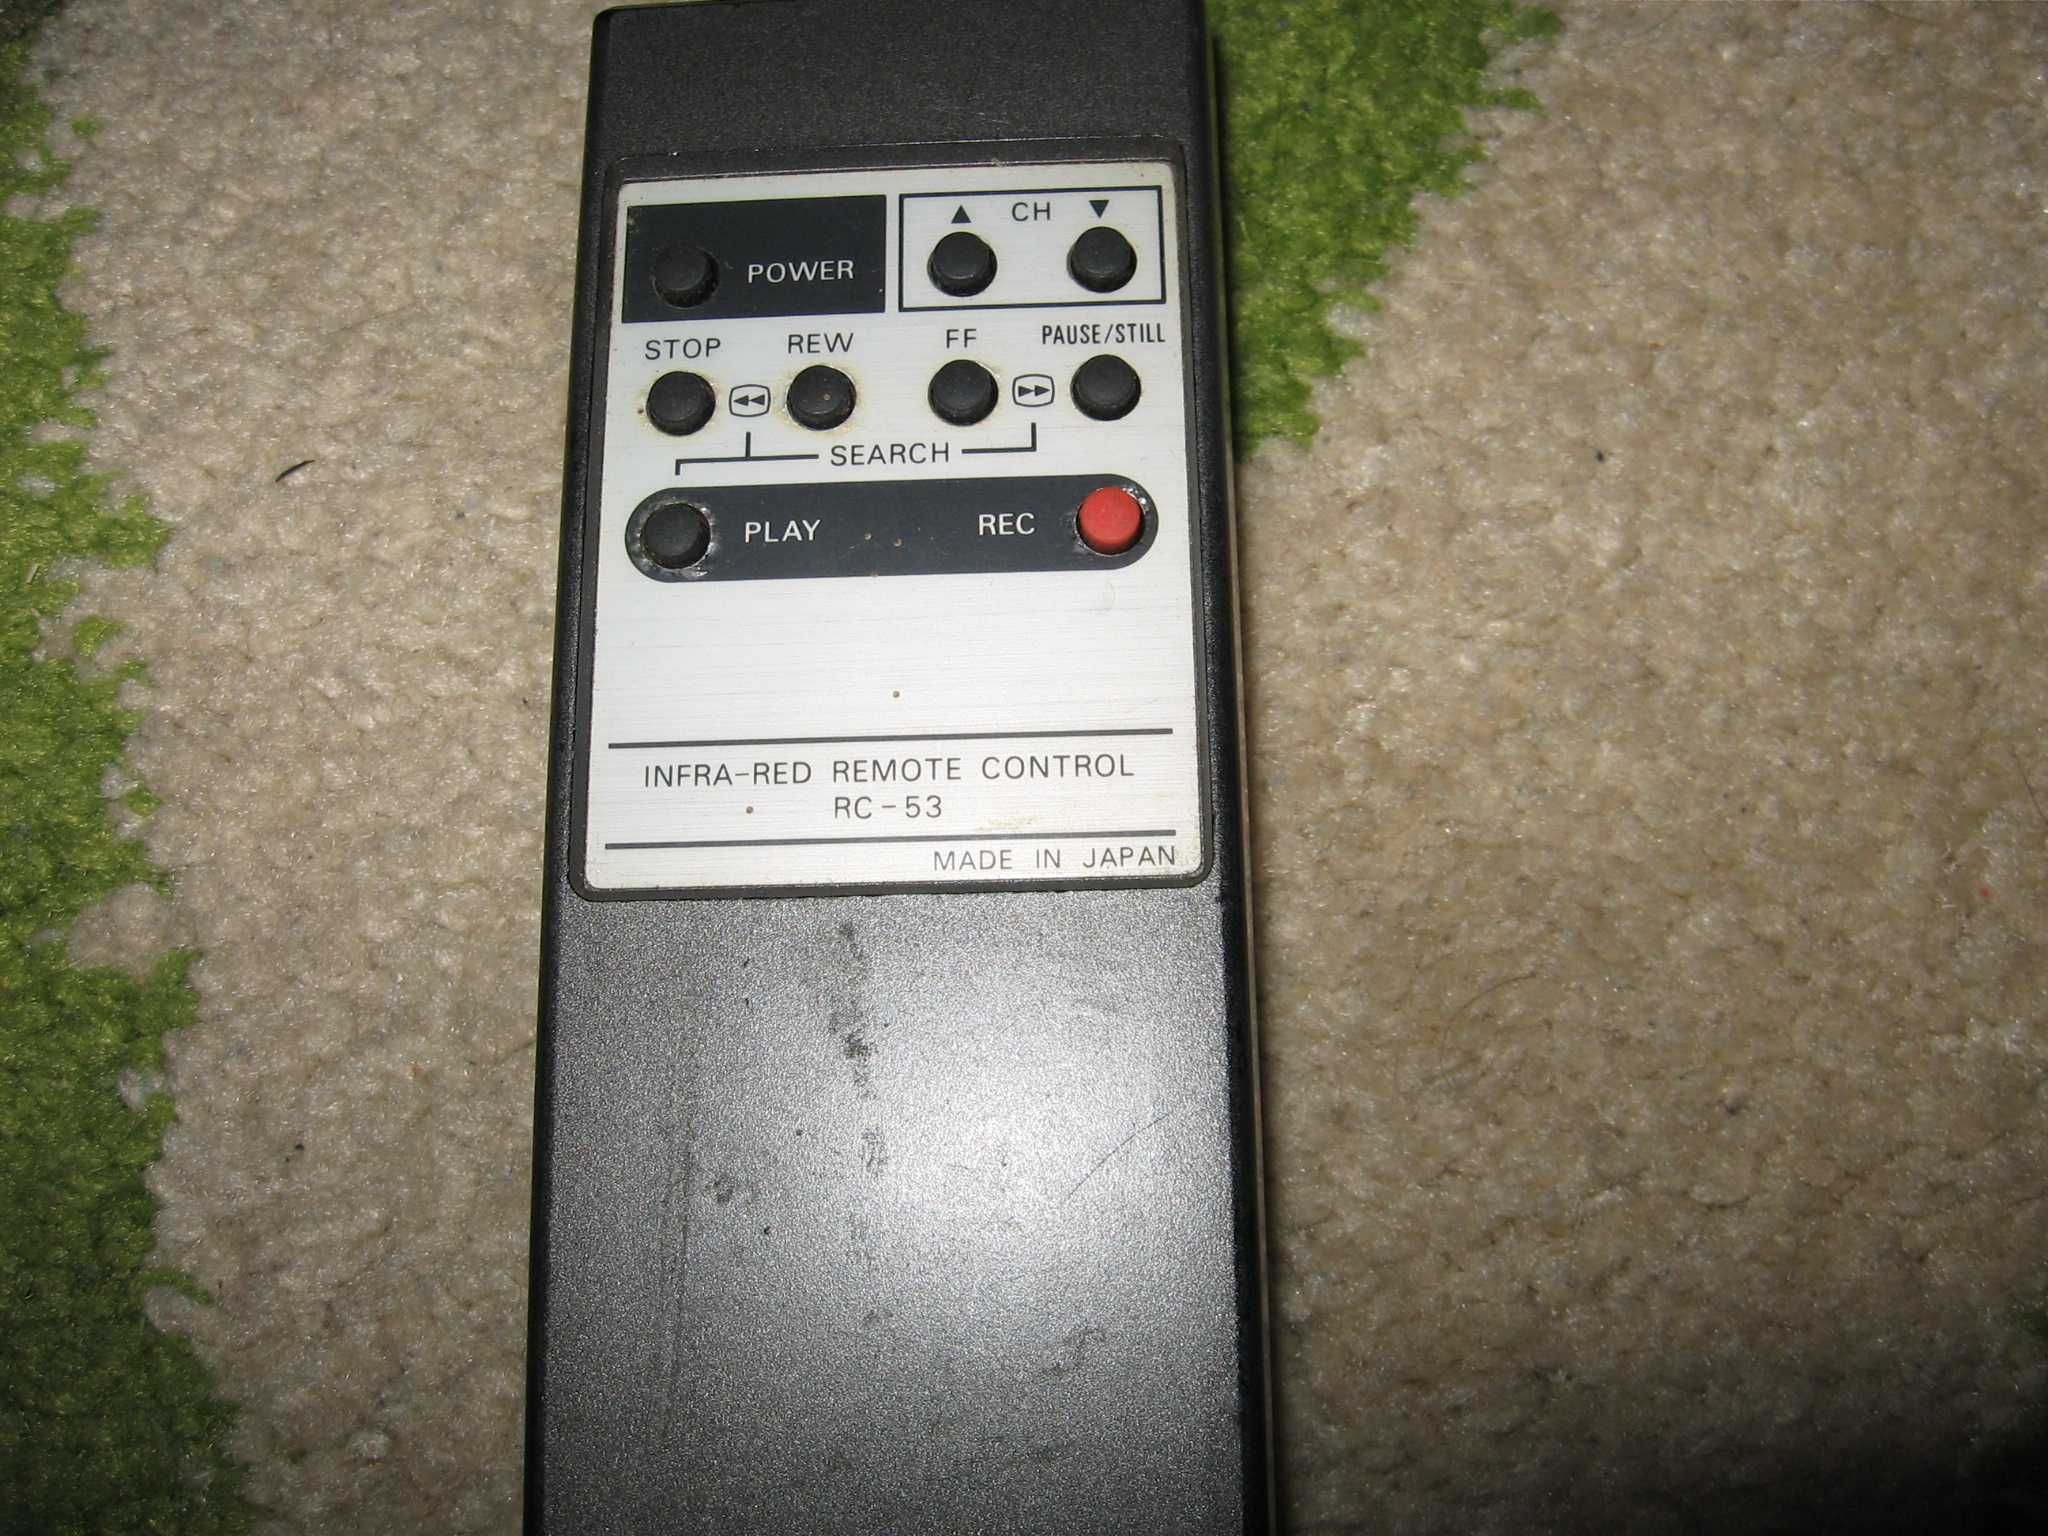 Pilot Orion RC-53 Infrared Remote Control For VHS Video Recorders